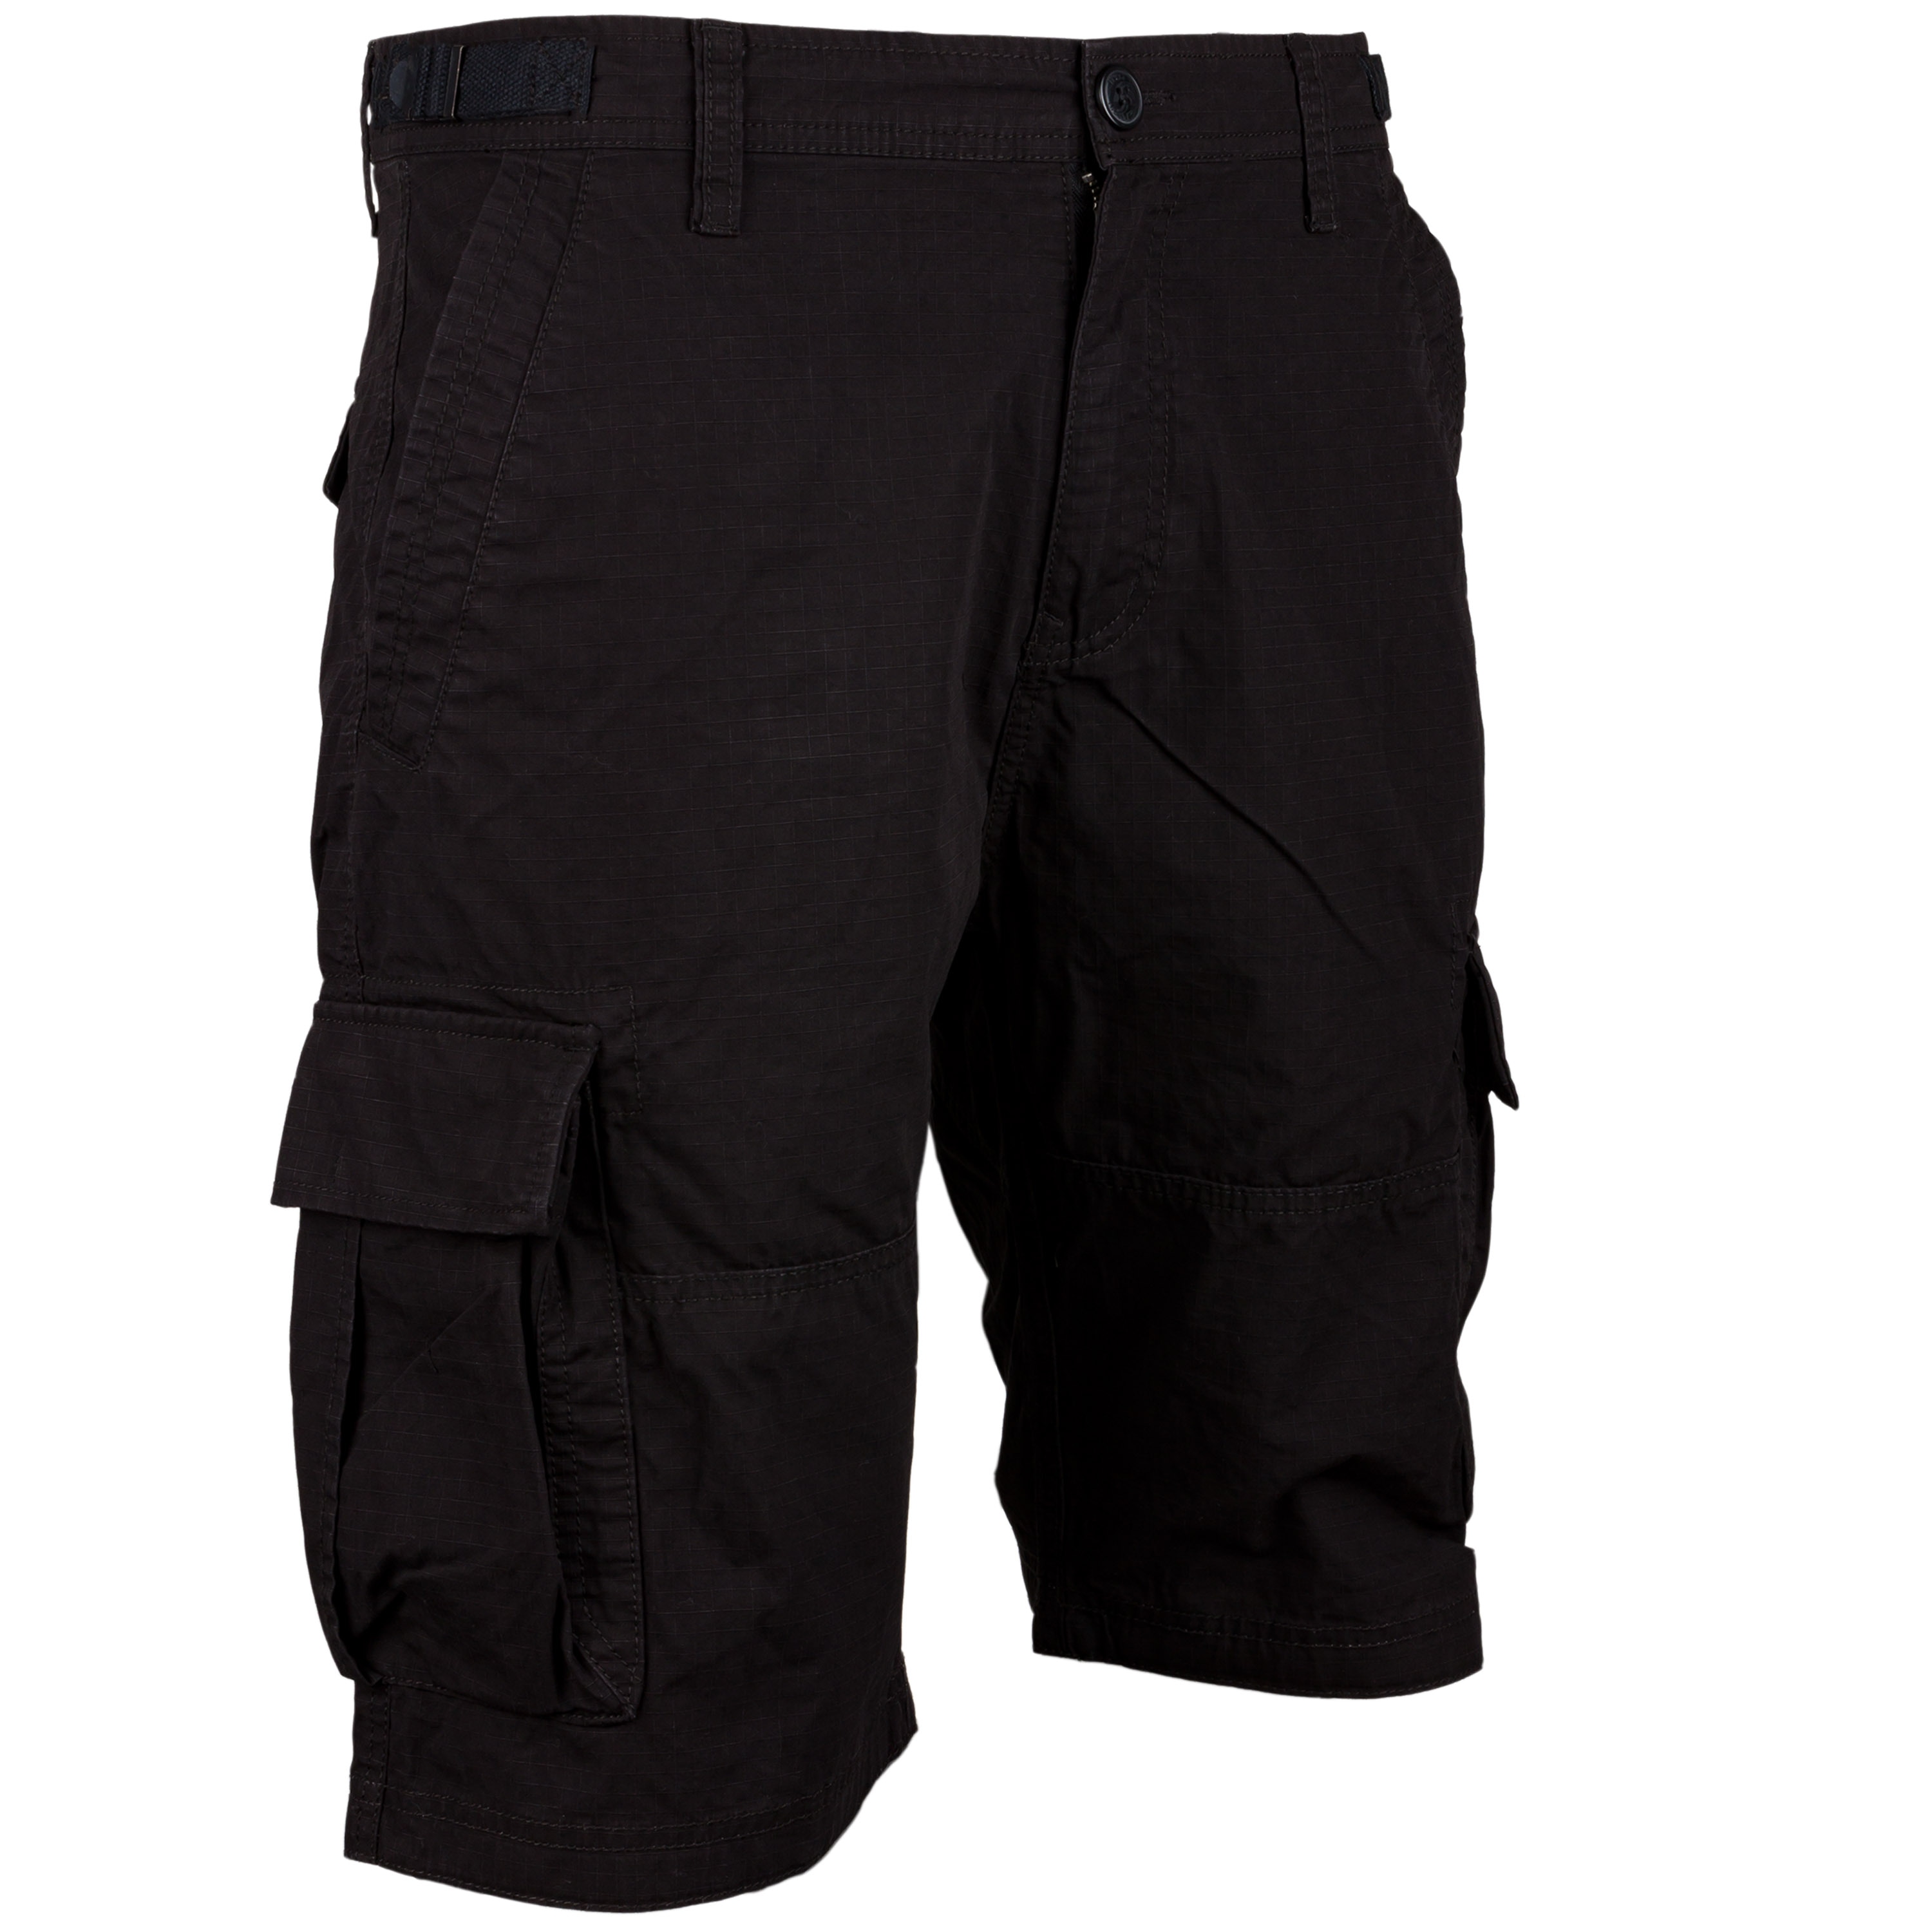 Purchase the Vintage Industries Shorts Terrance black by ASMC